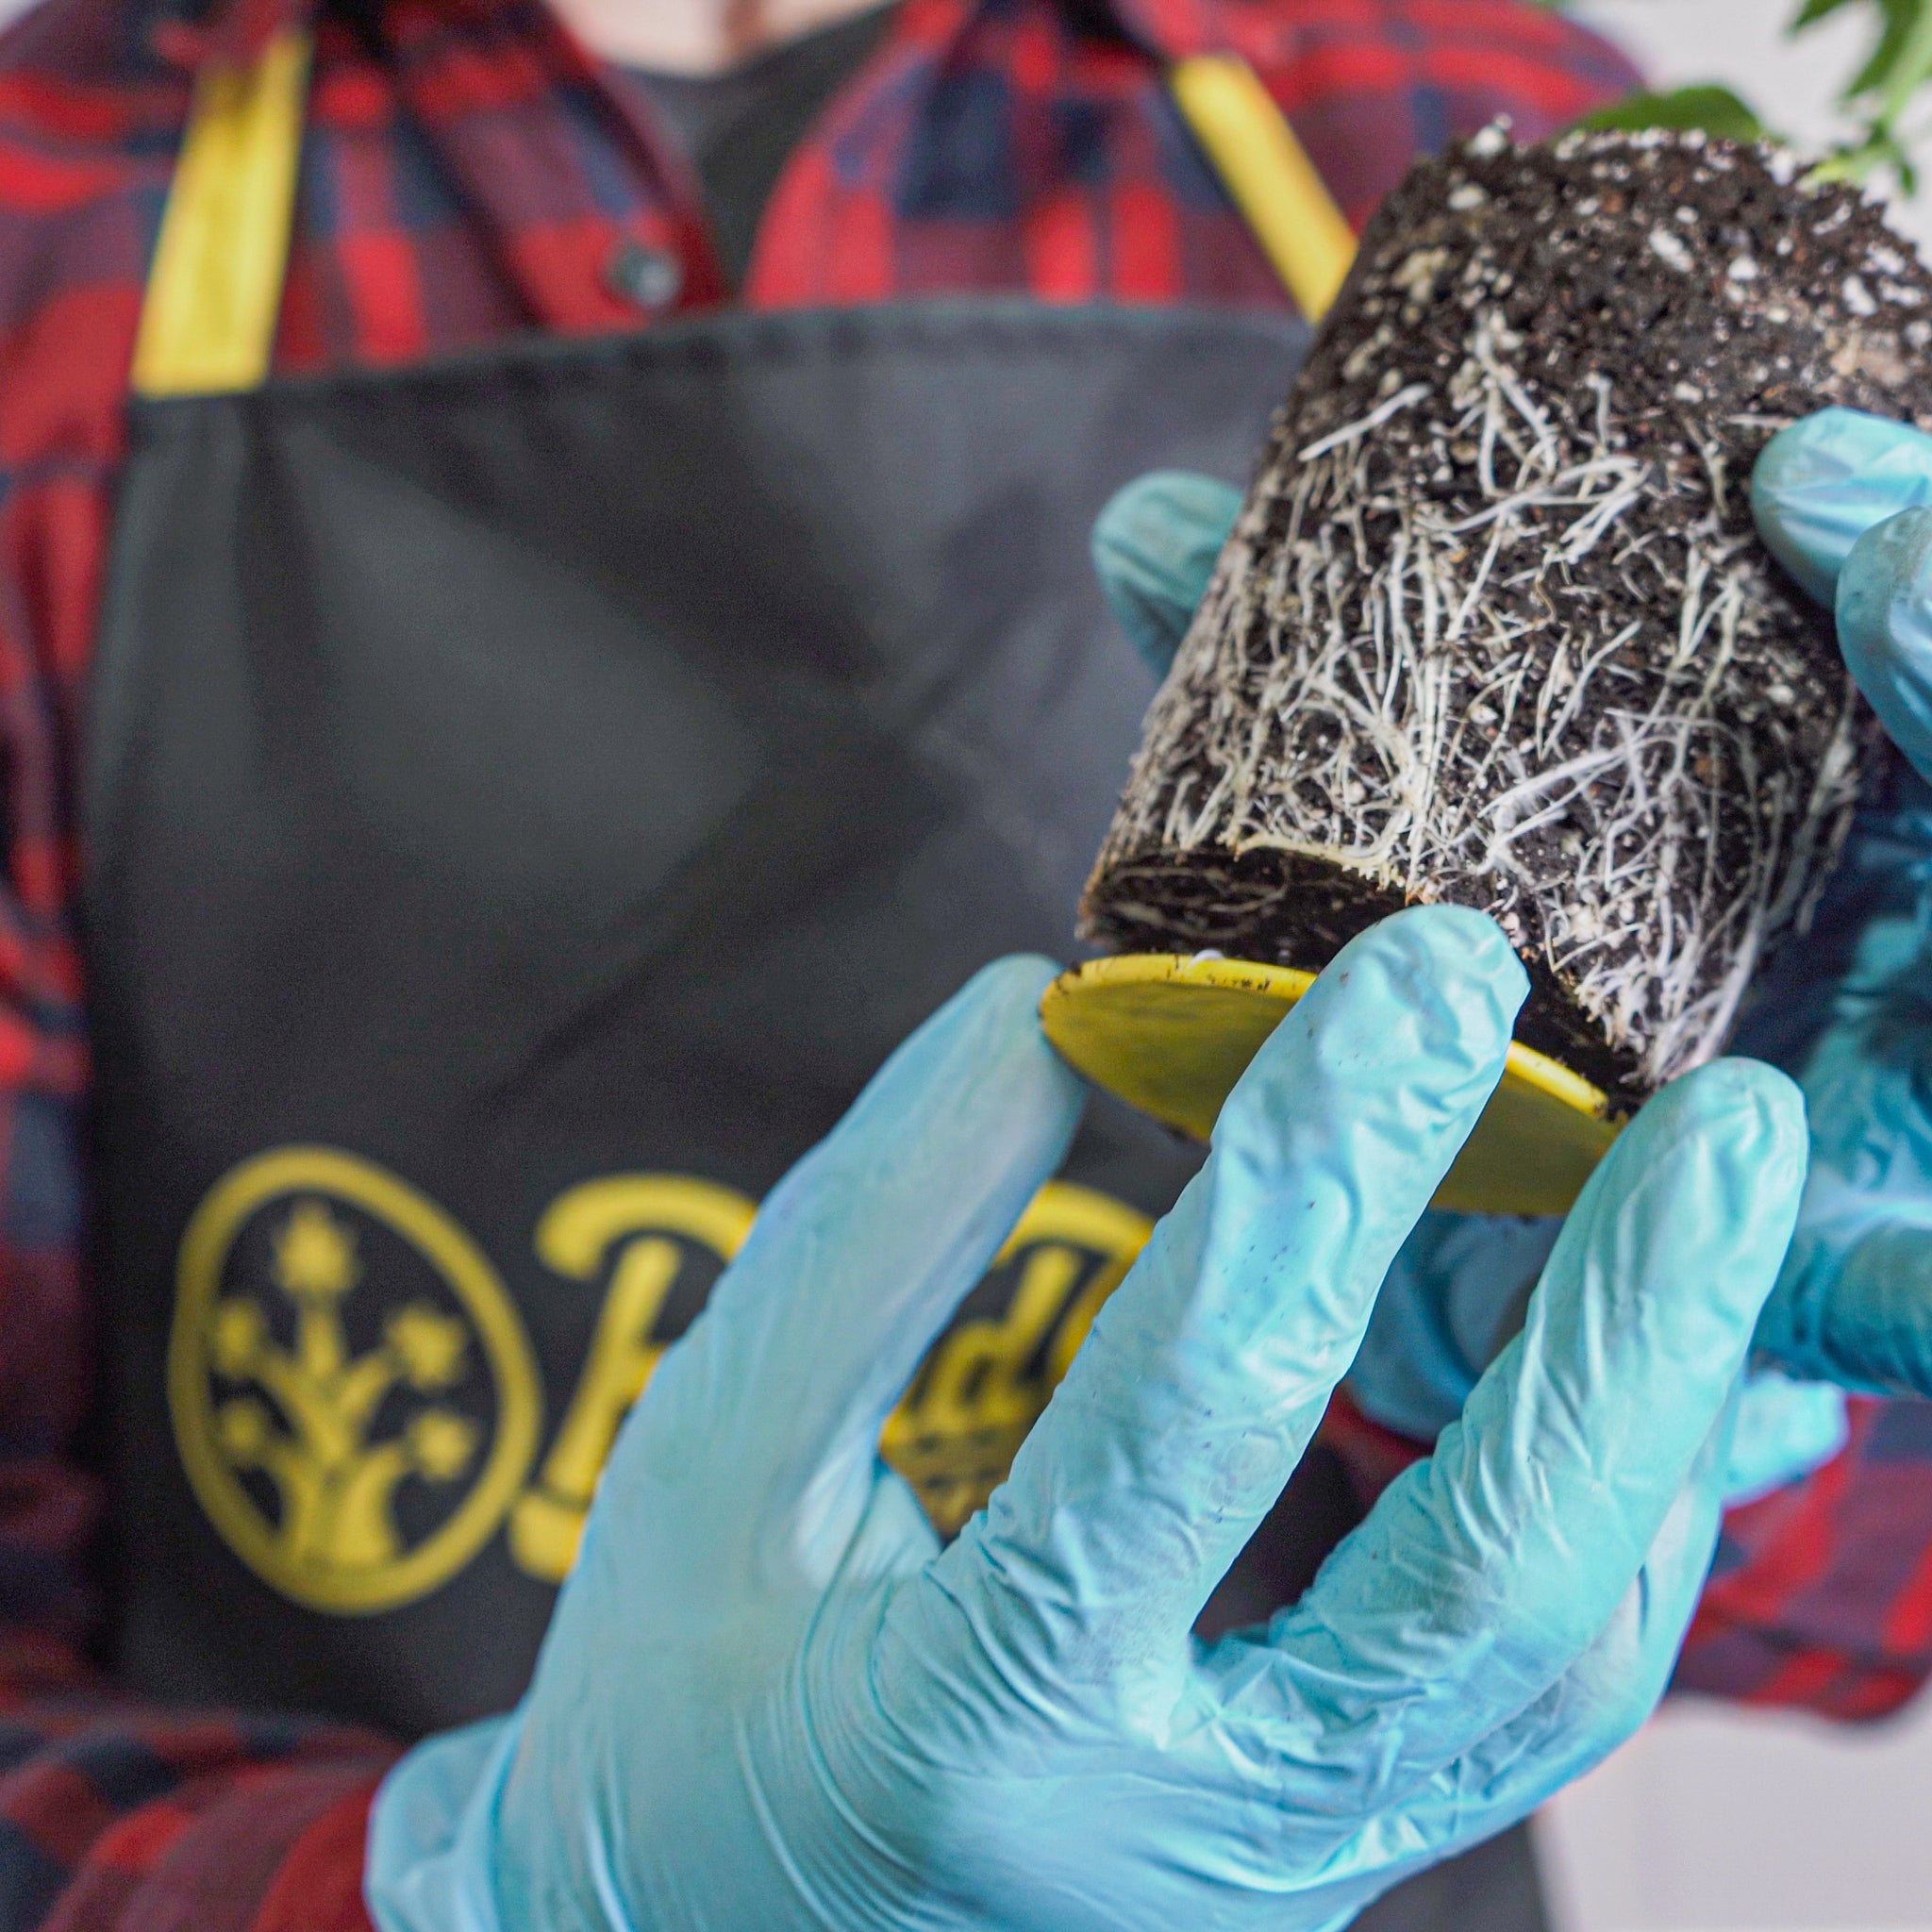 Image showing a person in a plaid shirt and blue gloves carefully holding a young cannabis plant removed from a BudCups container. The plant's extensive white root system is visible against the dark soil, highlighted as the person examines it against the backdrop of a BudPots apron with a prominent logo.